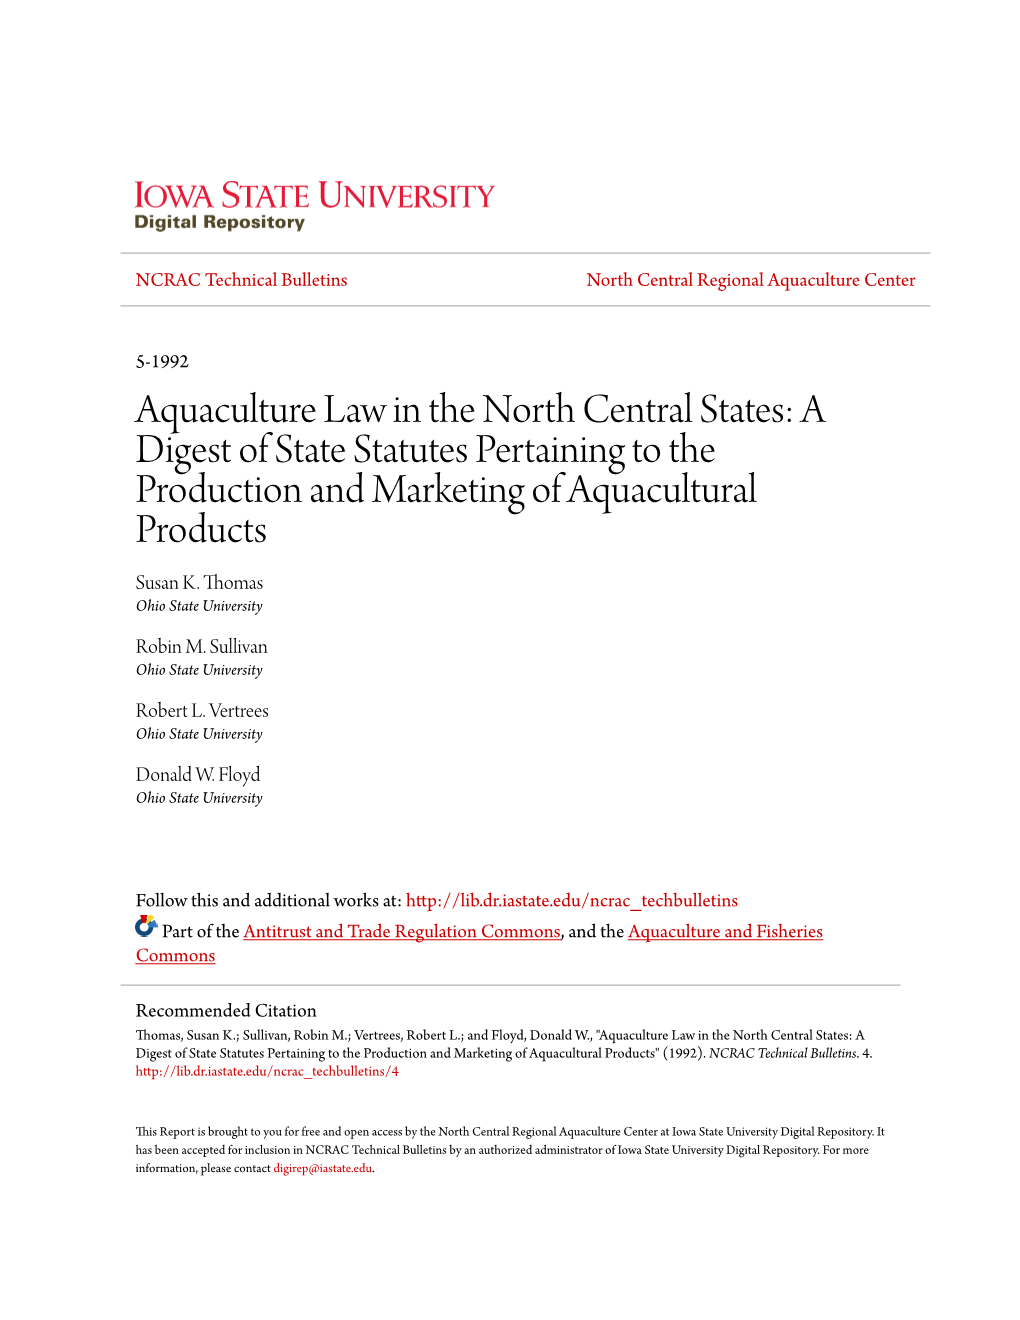 A Digest of State Statutes Pertaining to the Production and Marketing of Aquacultural Products Susan K